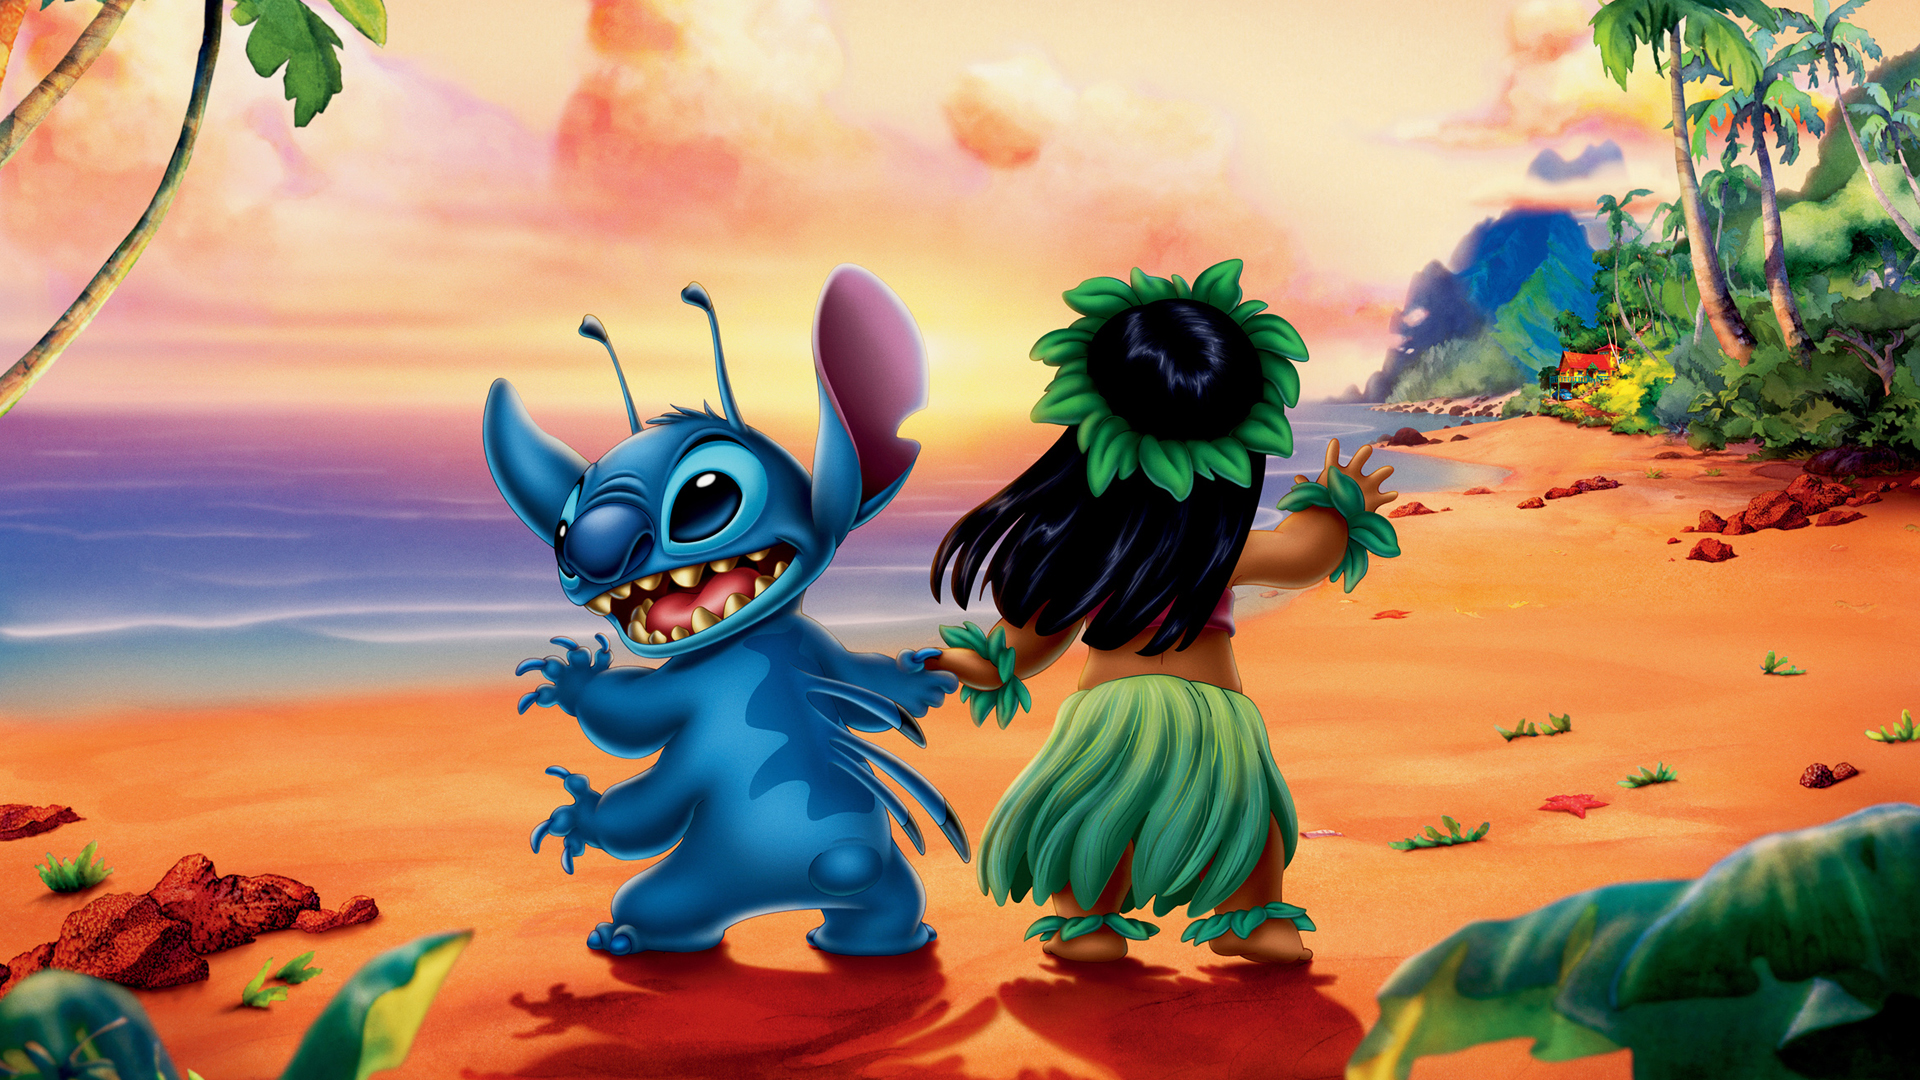 Stitch Wallpapers HD Wallpapers, Backgrounds, Images, Art Photos